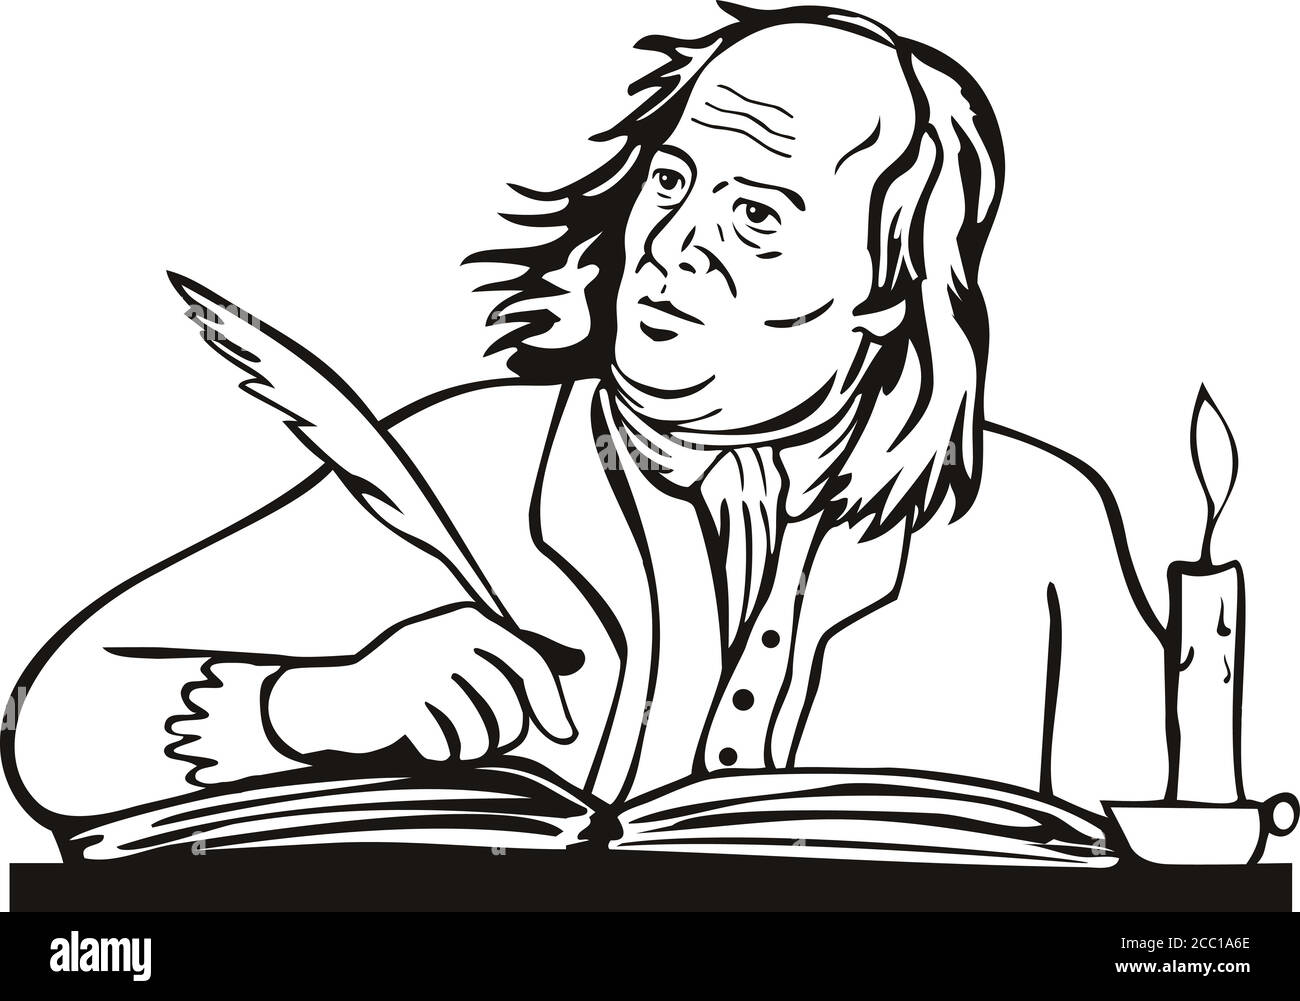 Retro style illustration of Benjamin Franklin, an American polymath and one of the Founding Fathers of the United States, as a writer writing with qui Stock Vector